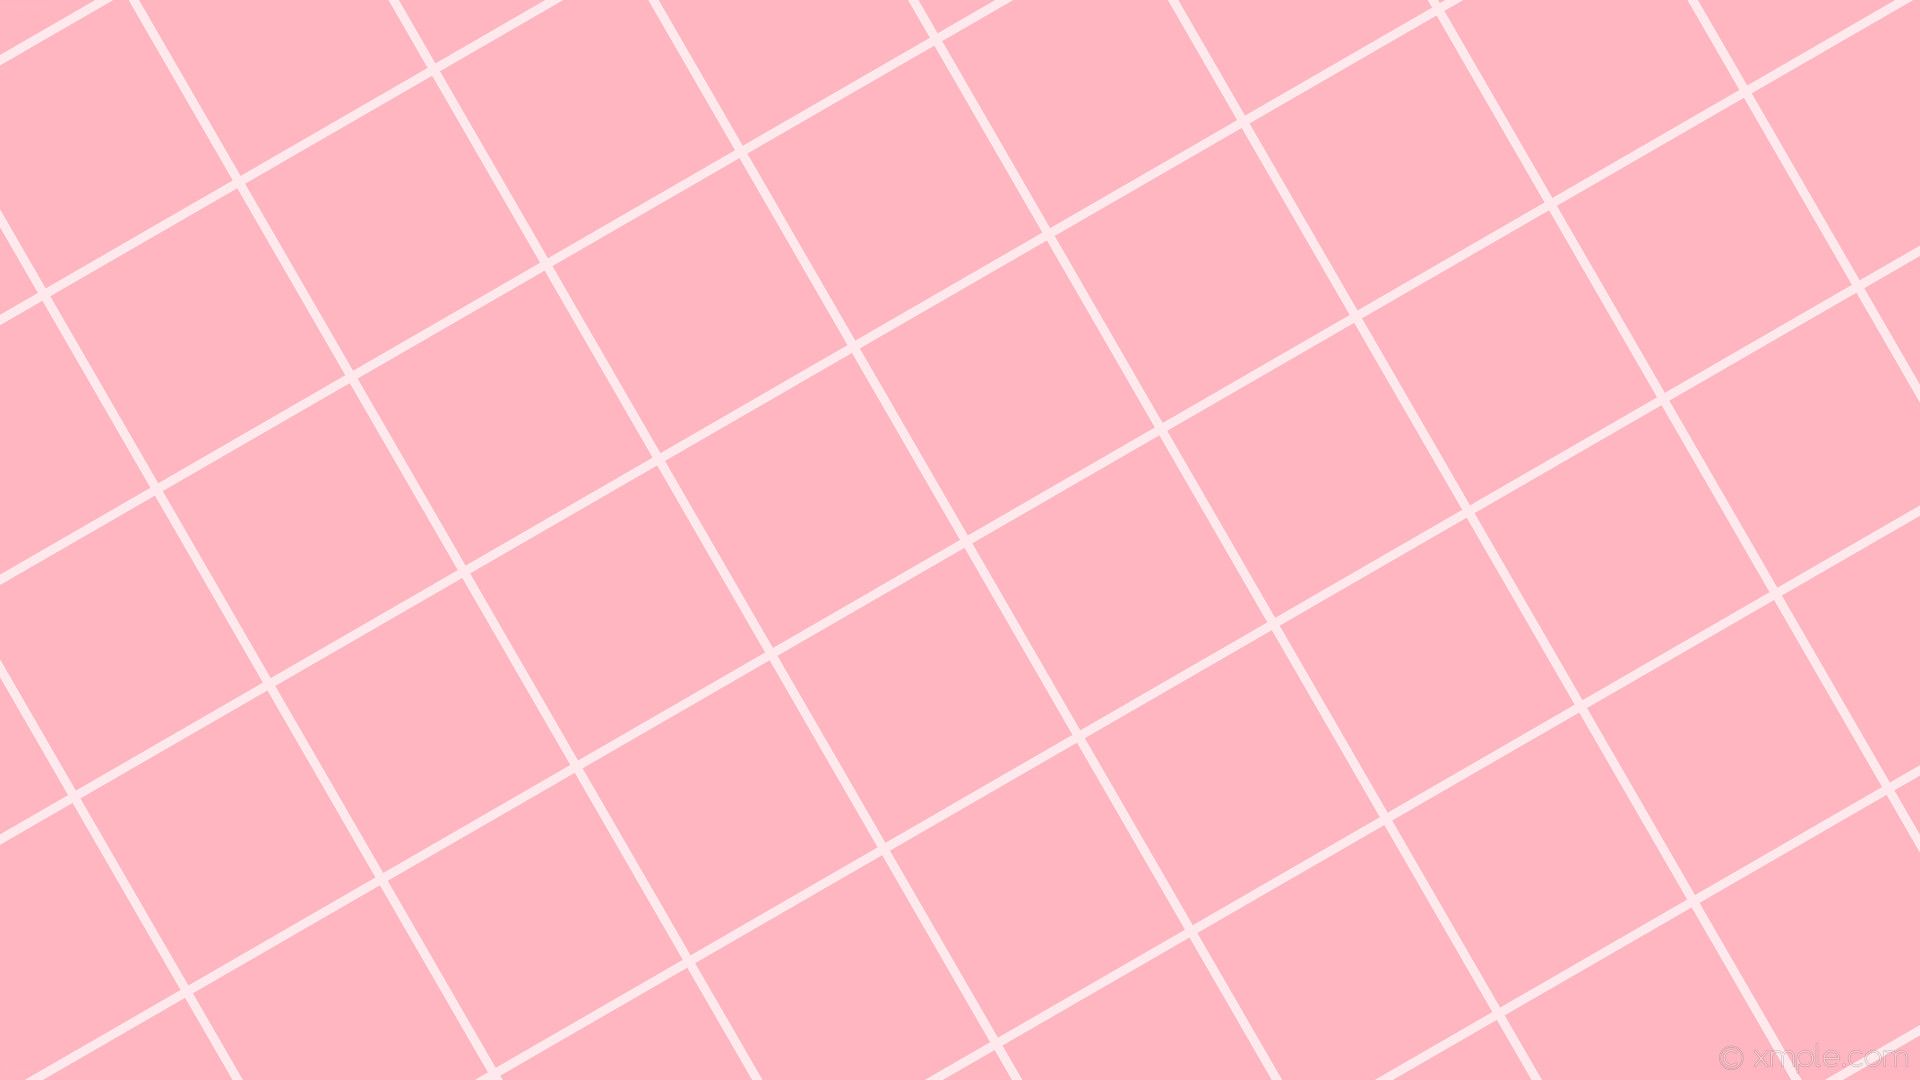 A pink and white checkered background - Grid, hot pink, light pink